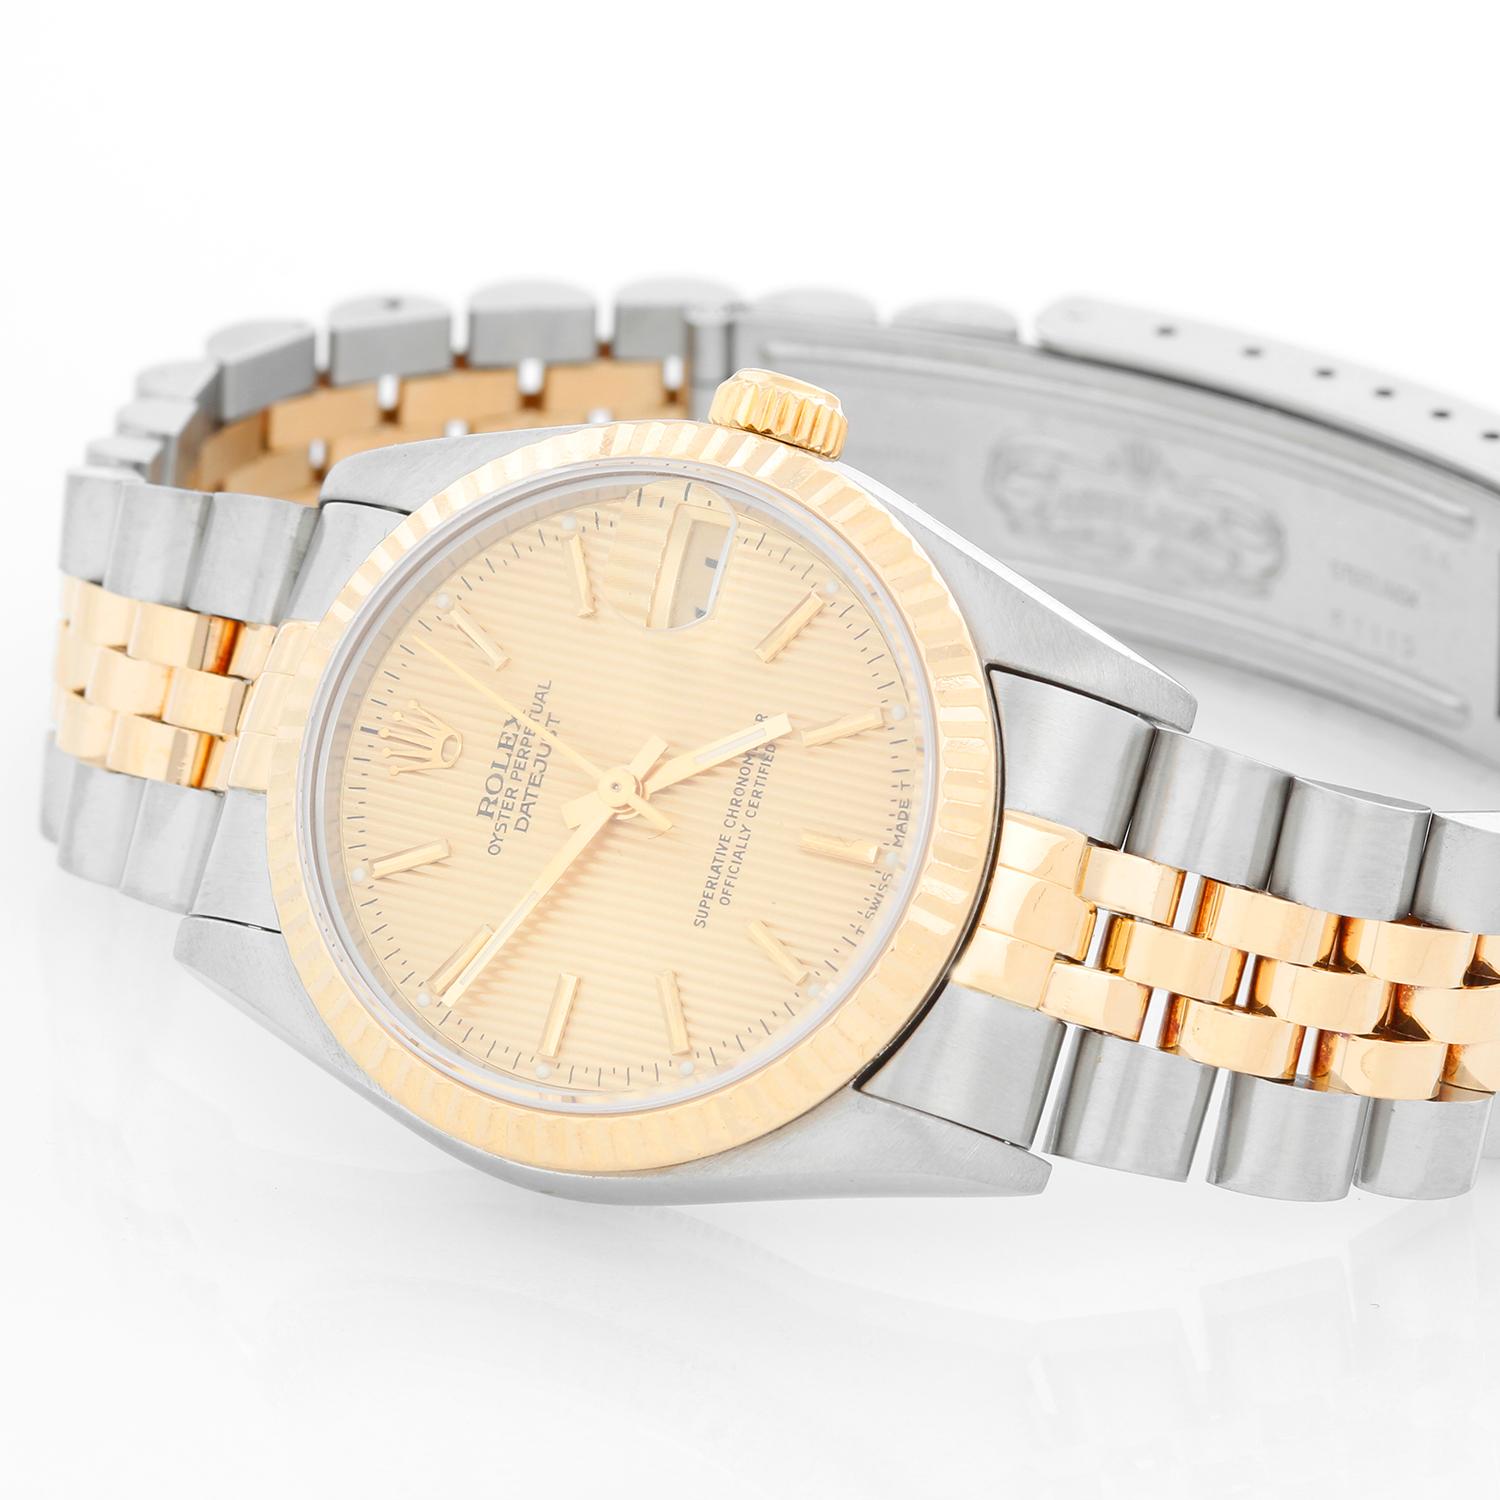 Rolex Datejust Midsize 2-Tone Watch 68273 - Automatic winding, 29 jewels, Quickset, sapphire crystal.  Stainless steel case with 18k yellow gold  fluted bezel. Textured champagne dial with stick hour markers . Stainless steel and 18k yellow gold